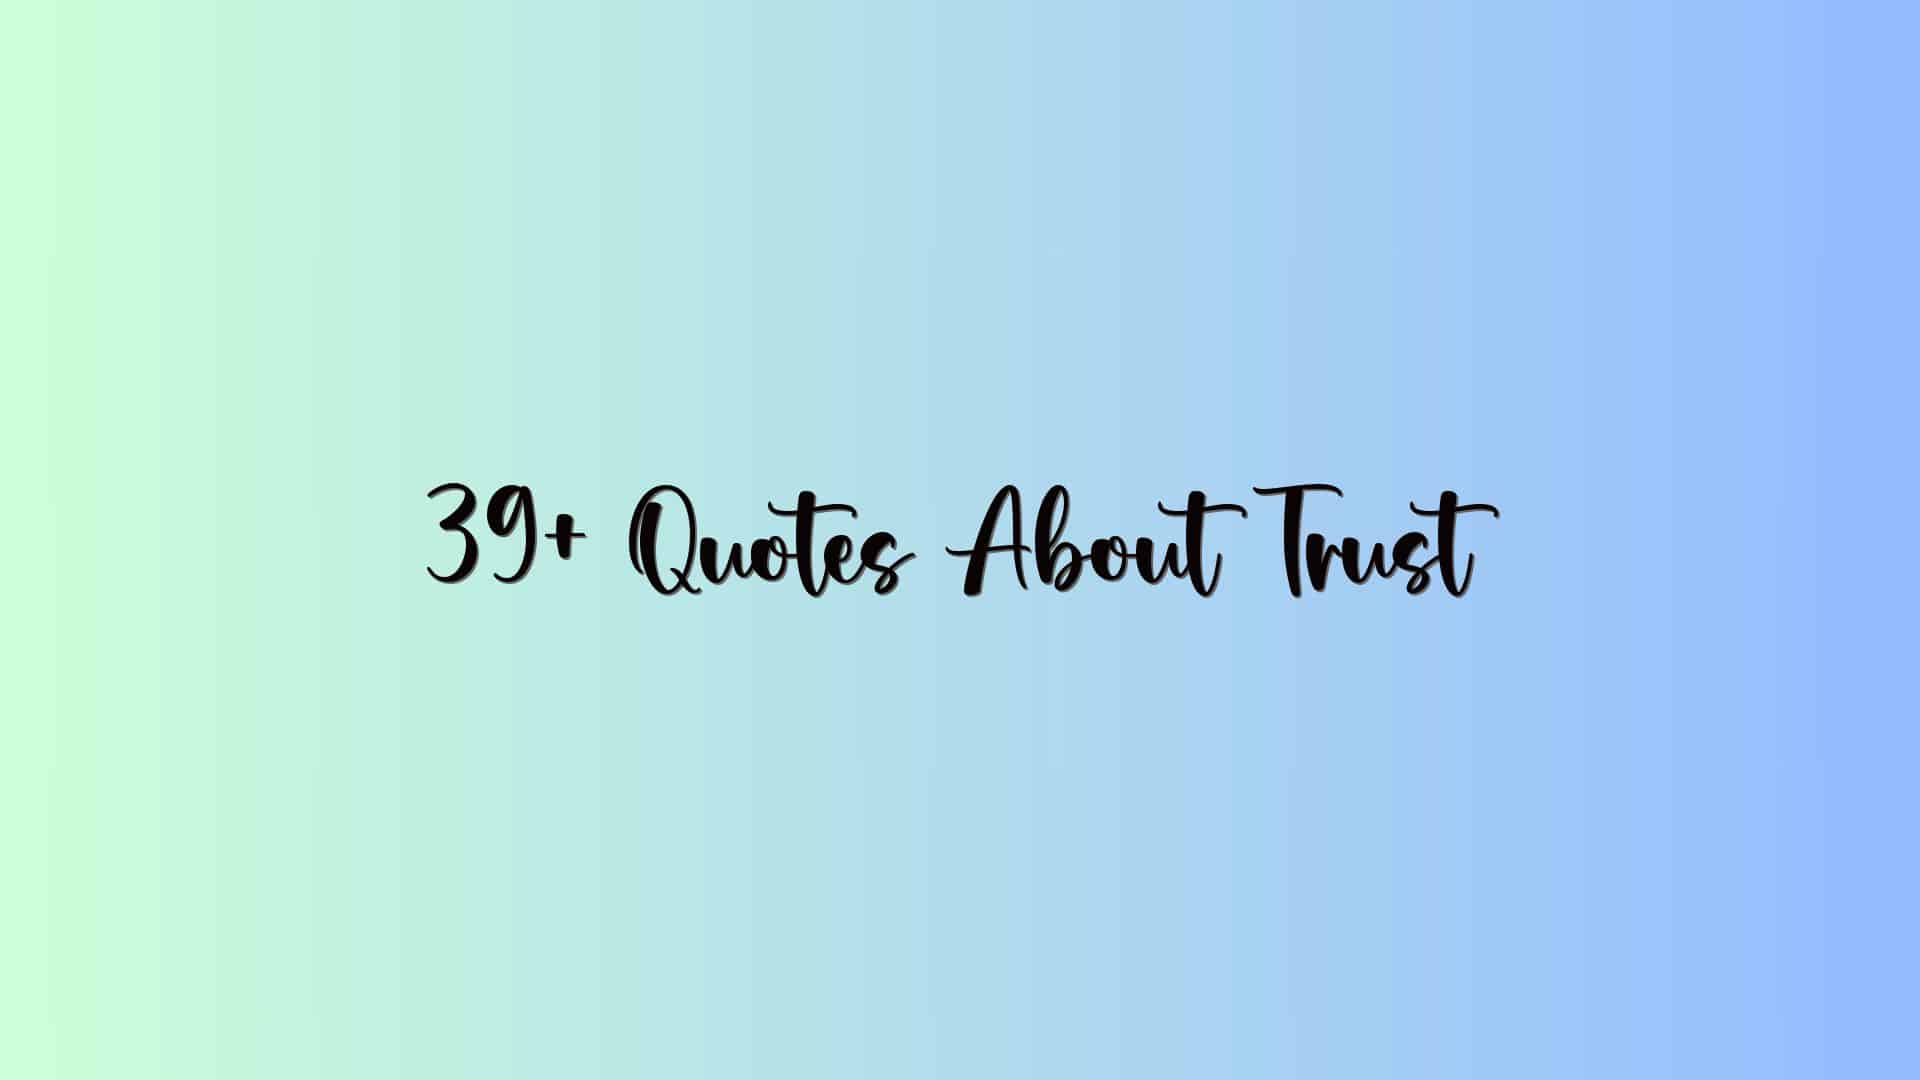 39+ Quotes About Trust